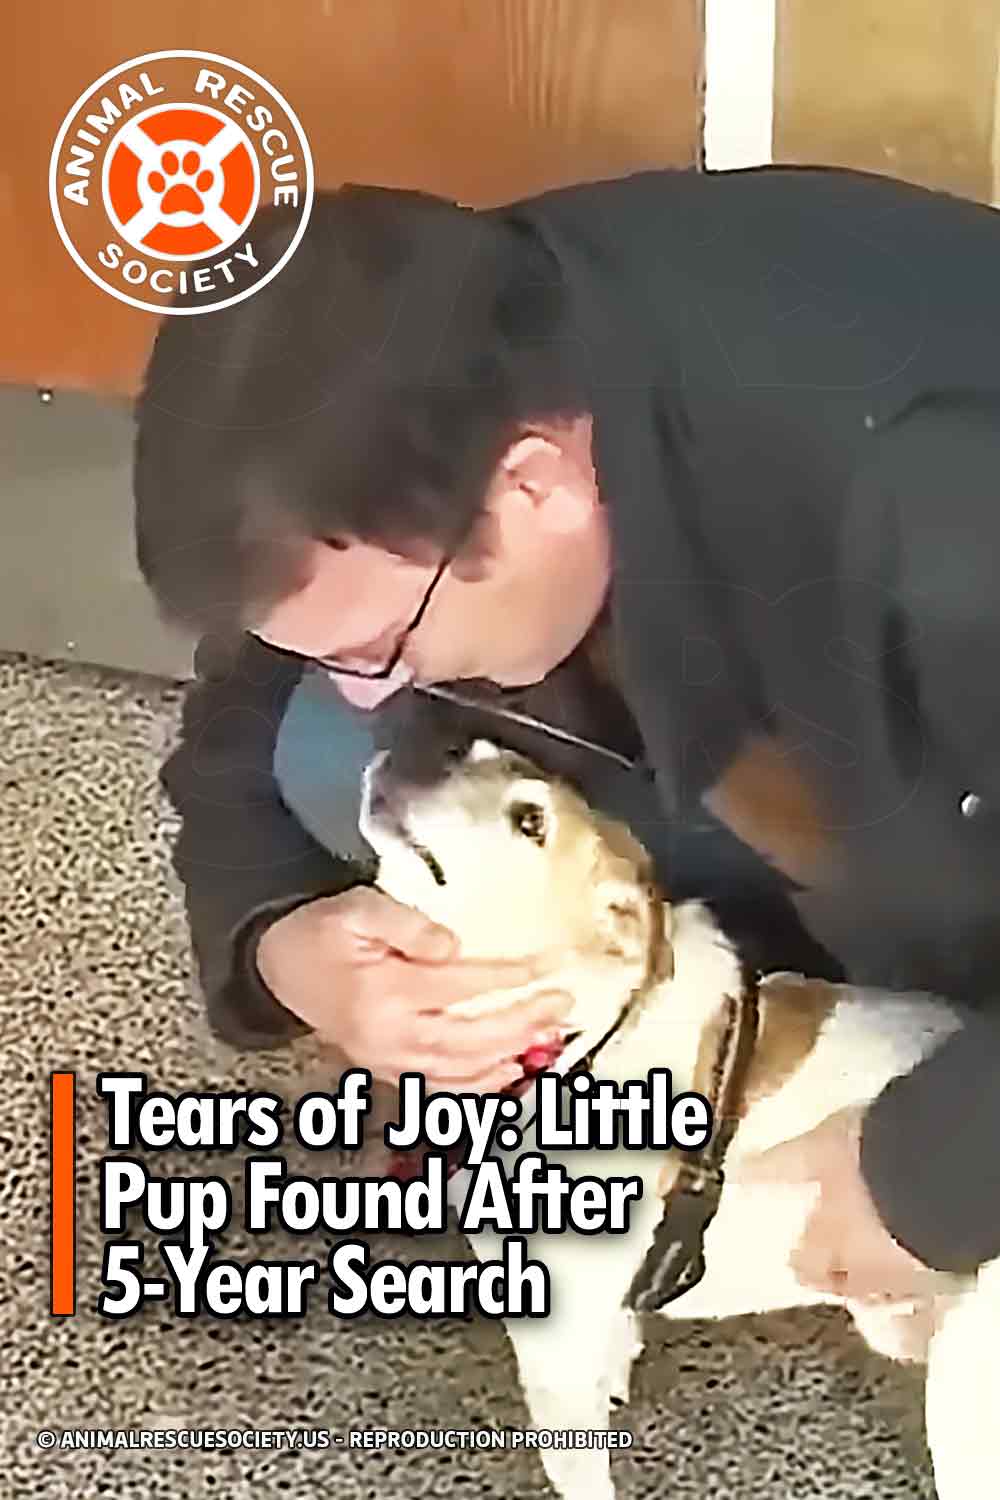 Tears of Joy: Little Pup Found After 5-Year Search